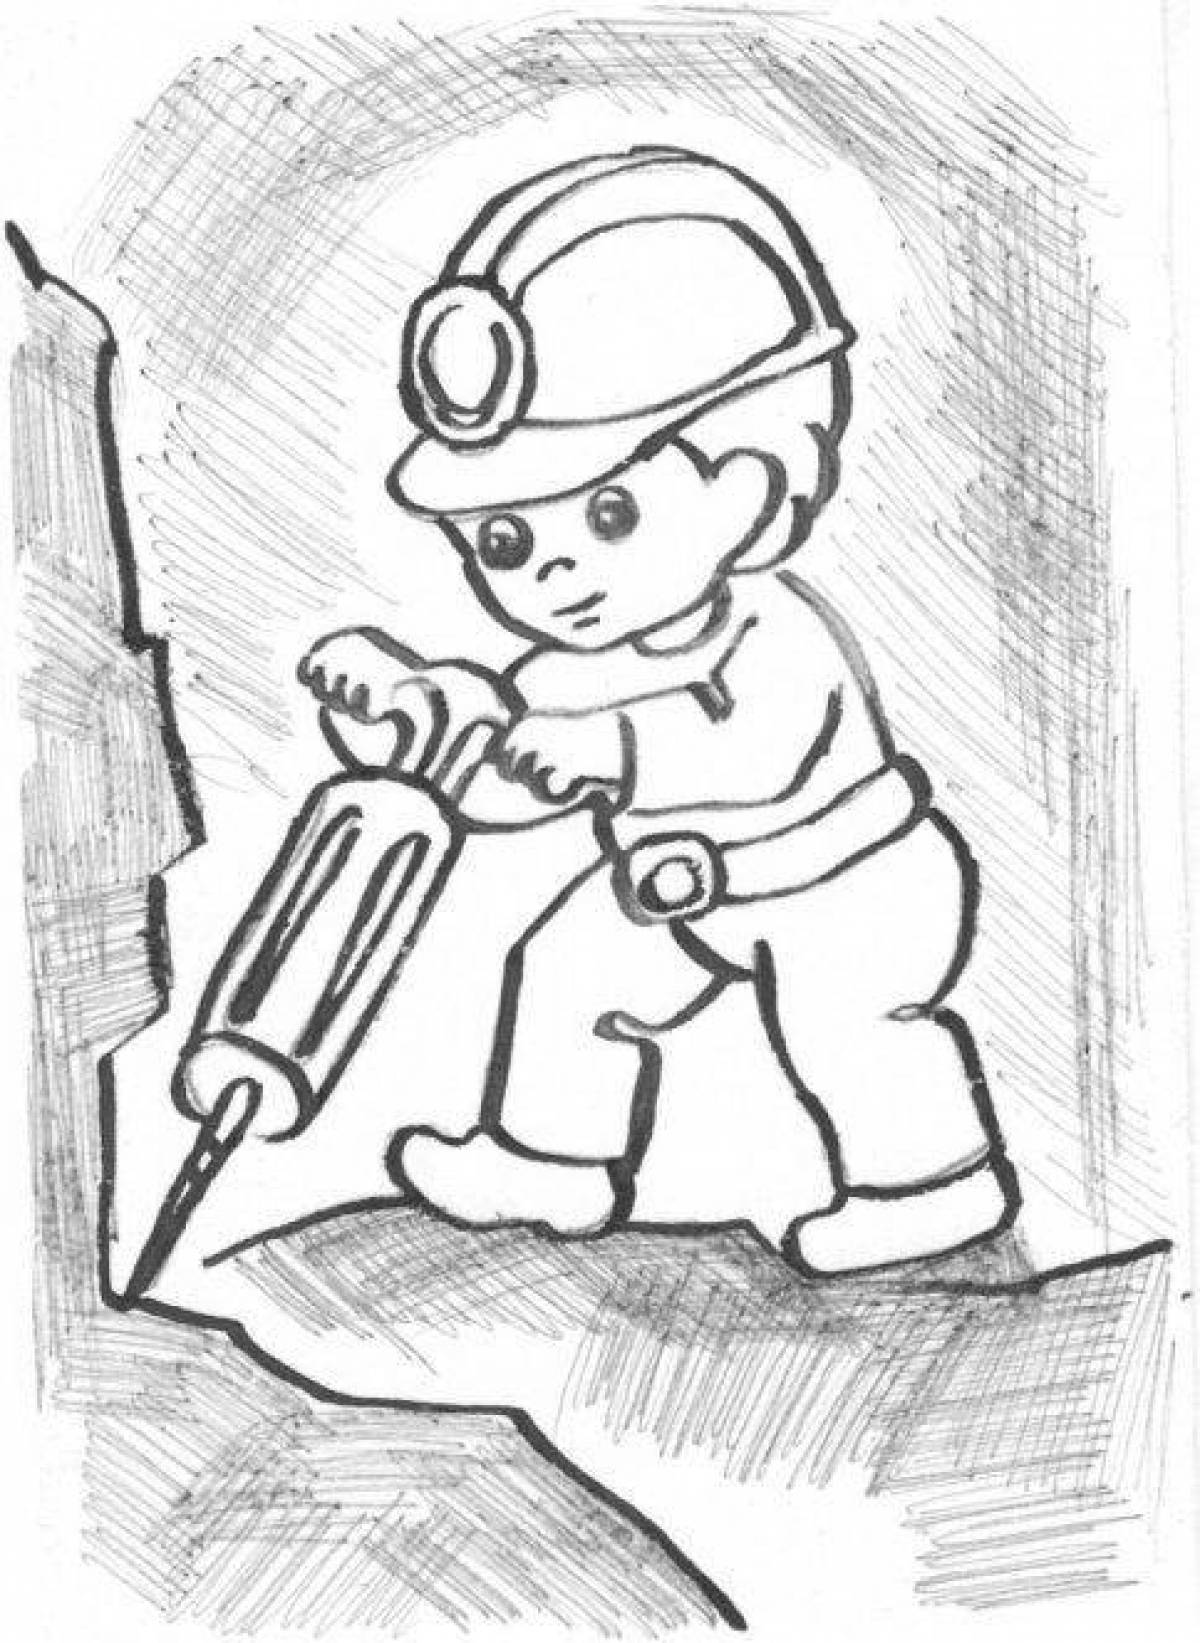 Miner amazing coloring book